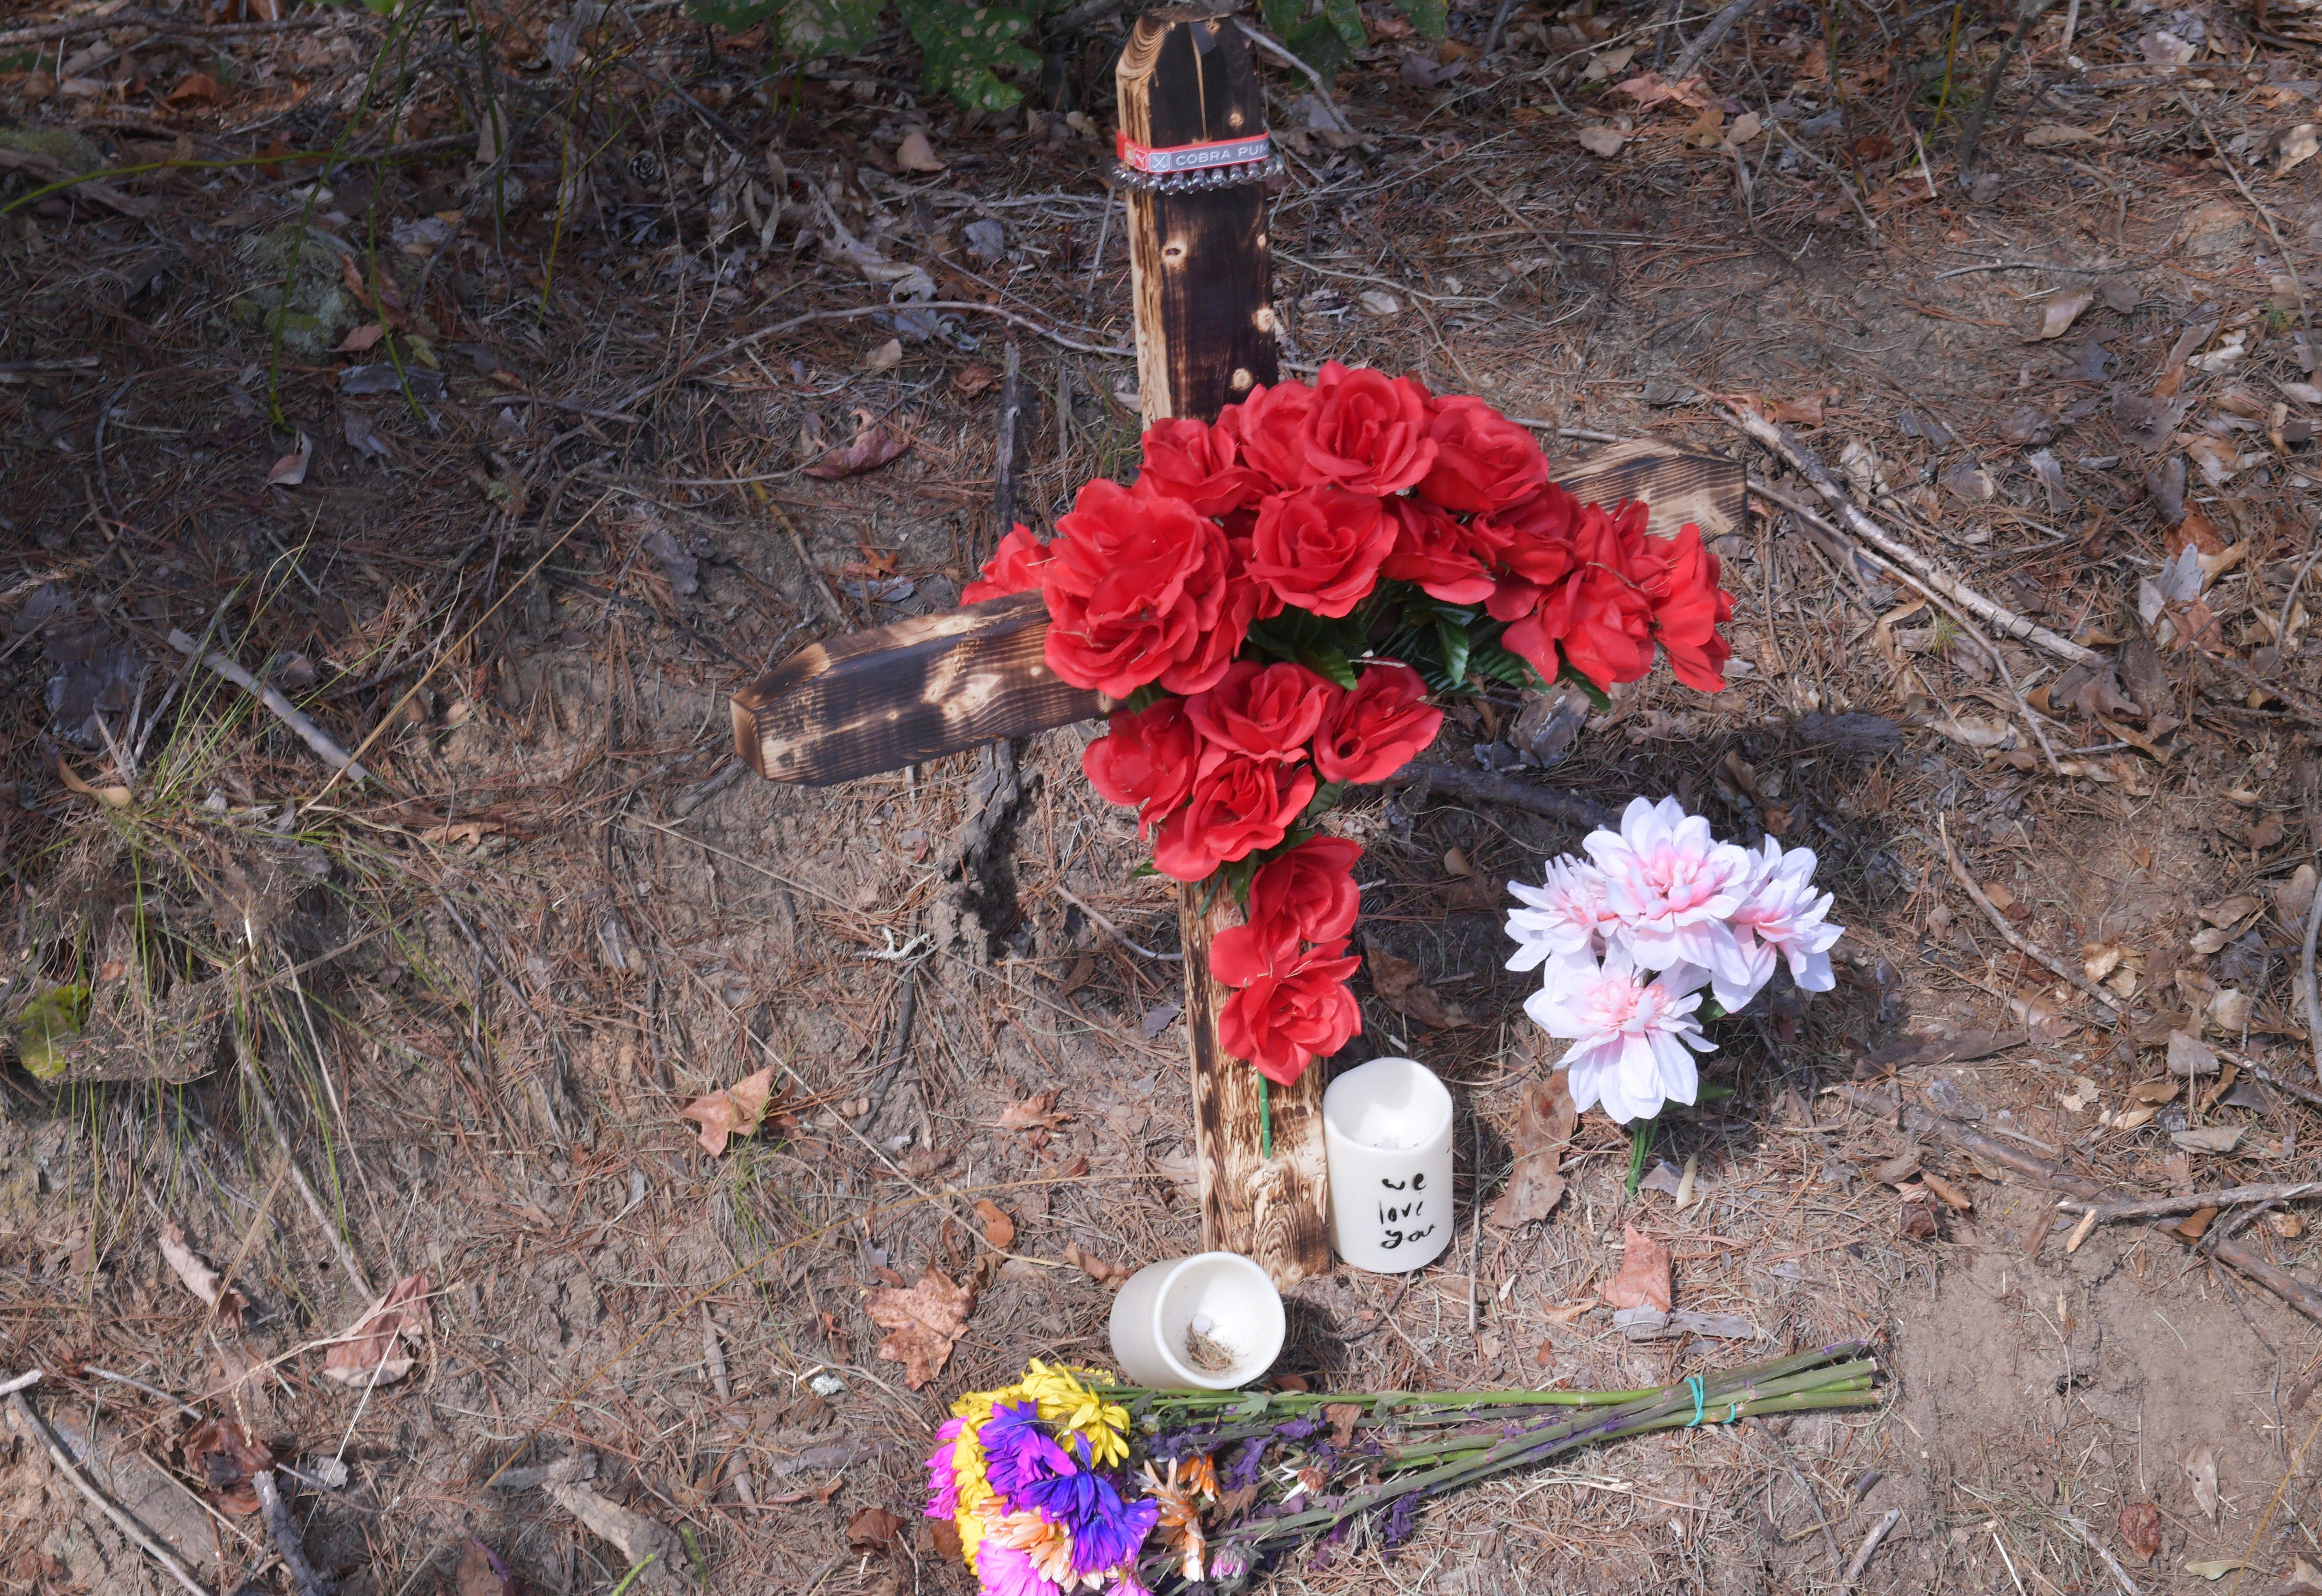 ****please check for best updated information+++++ The South Carolina Highway Patrol said a Friday afternoon wreck on Fairfield Road, near Henderson Road just outside of Chesnee, left three dead and injured another person. Flowers and other items were left at the crash site on Oct. 1, 2023.